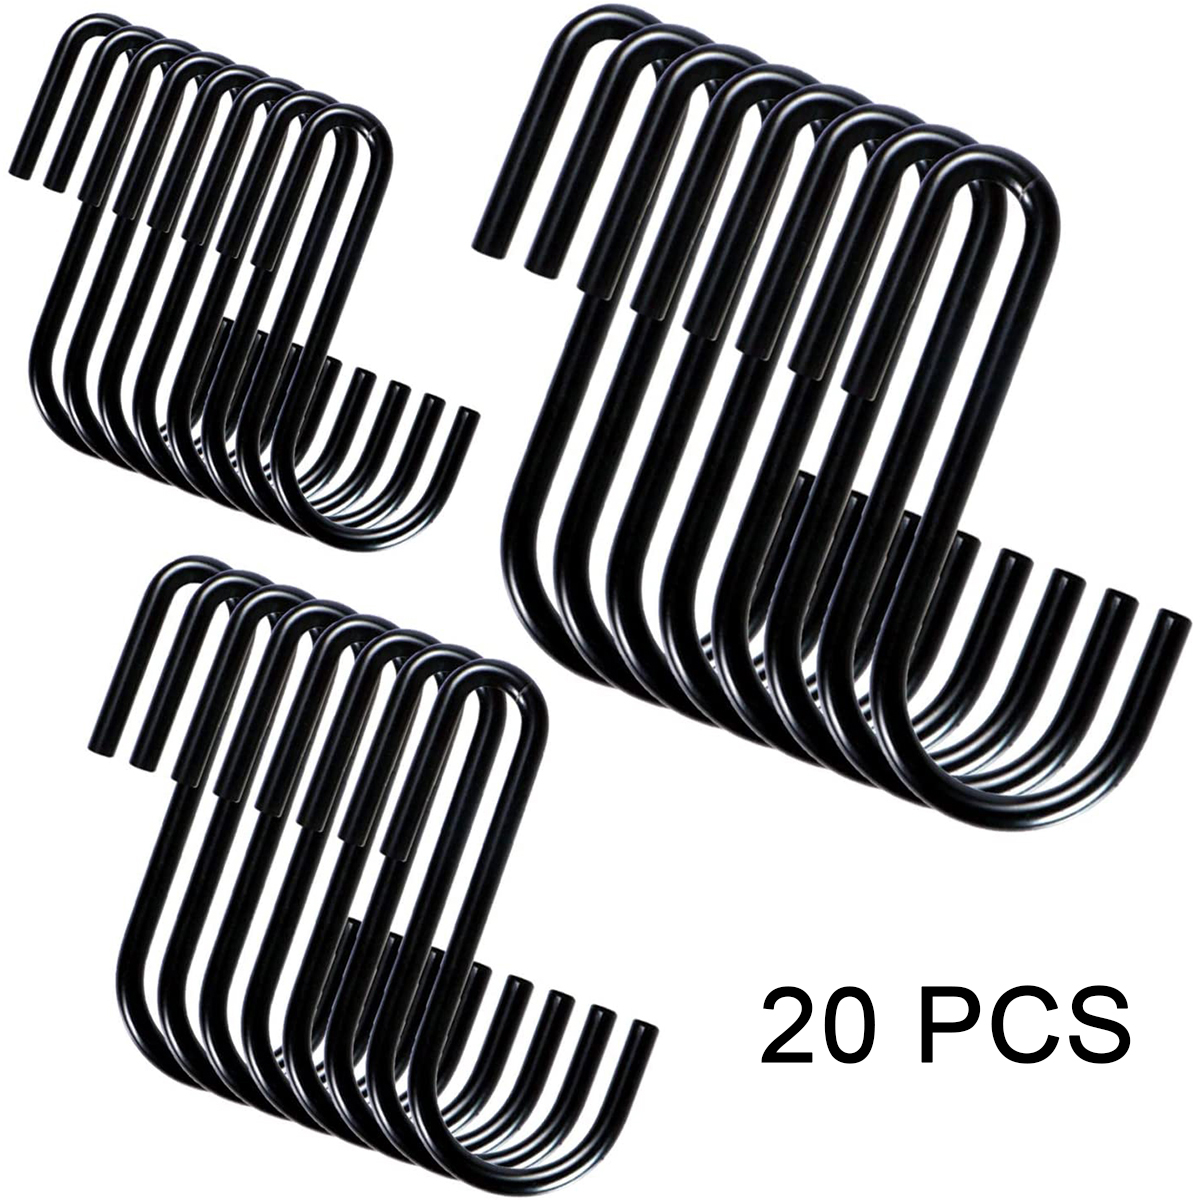 20 PCS S Hooks for Hanging - Zzbety Heavy Duty S Shaped Hooks with